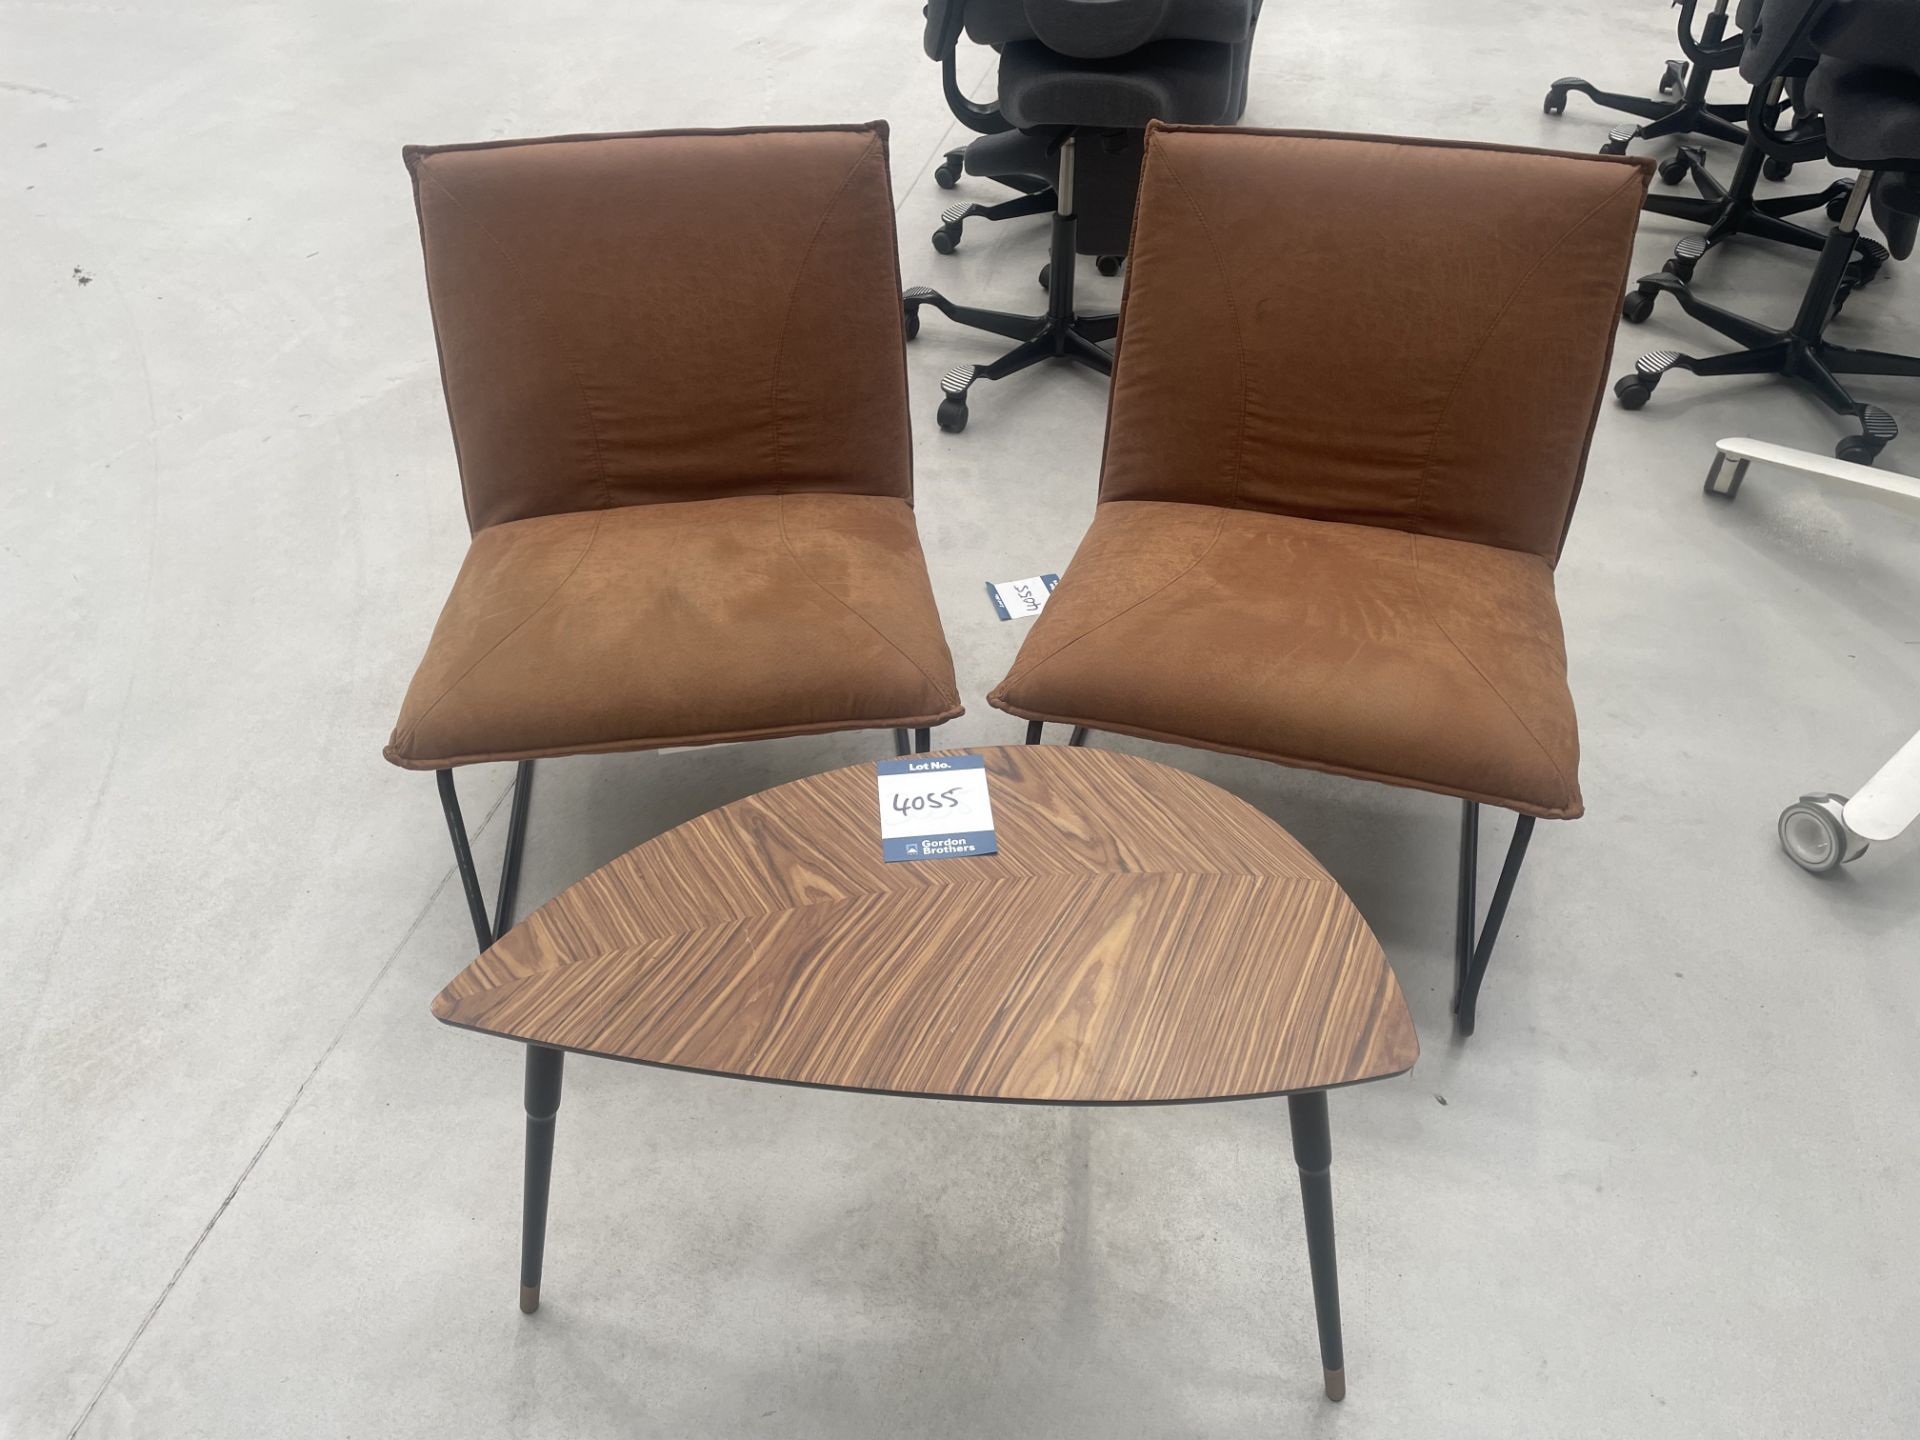 2x (no.) brown meeting chair and cofee table